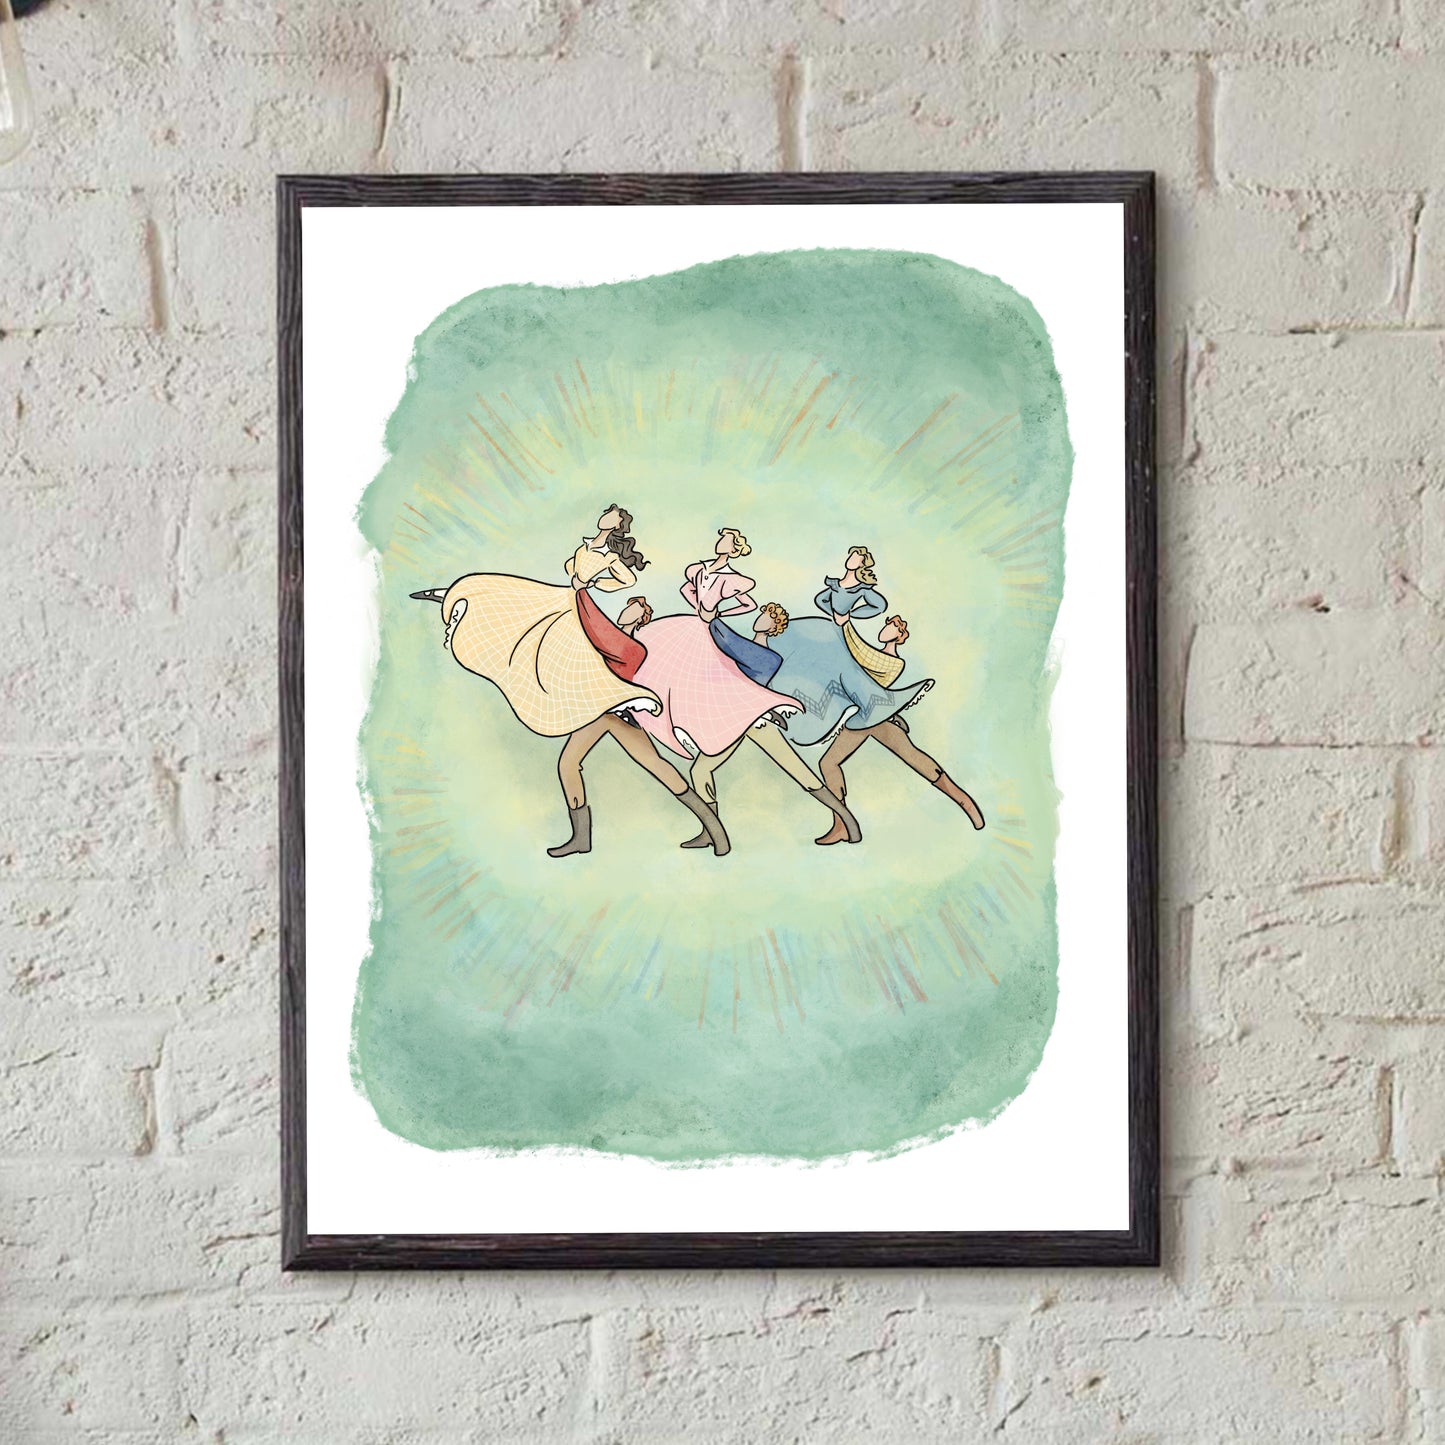 Barn Dance - Seven Brides for Seven Brothers Inspired print